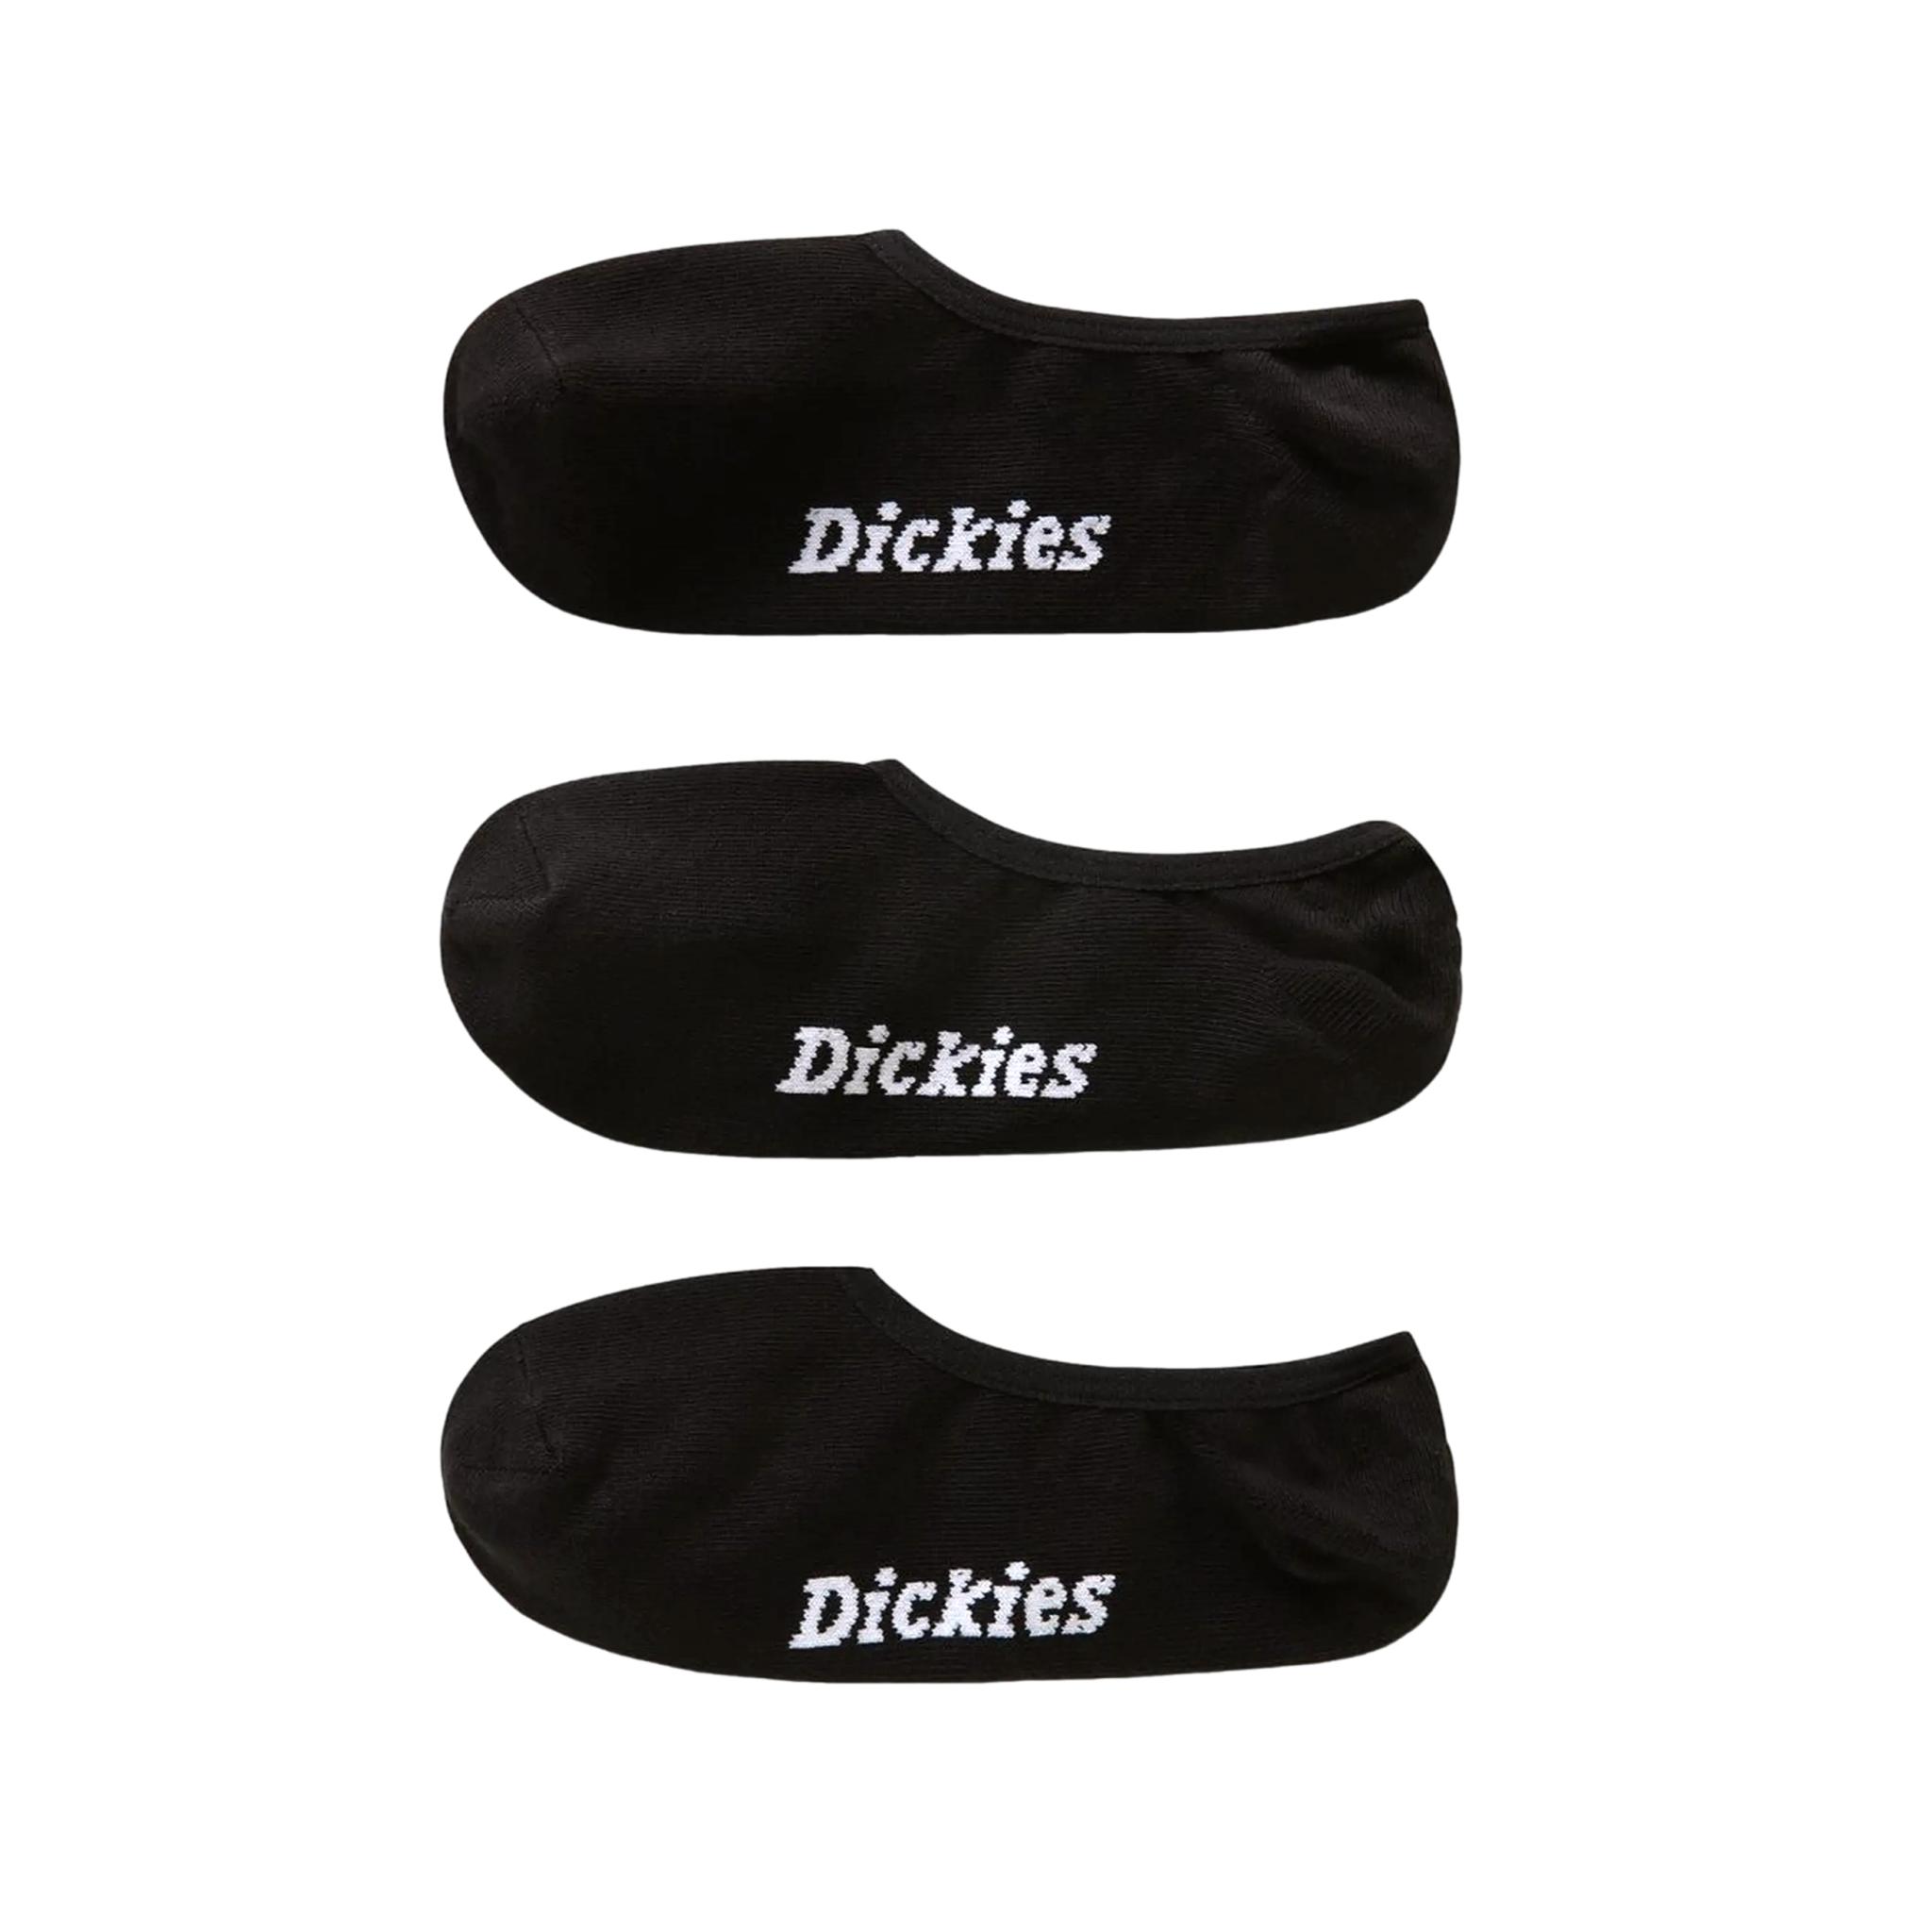 Dickies 3 Pack Calze Invisible Nero